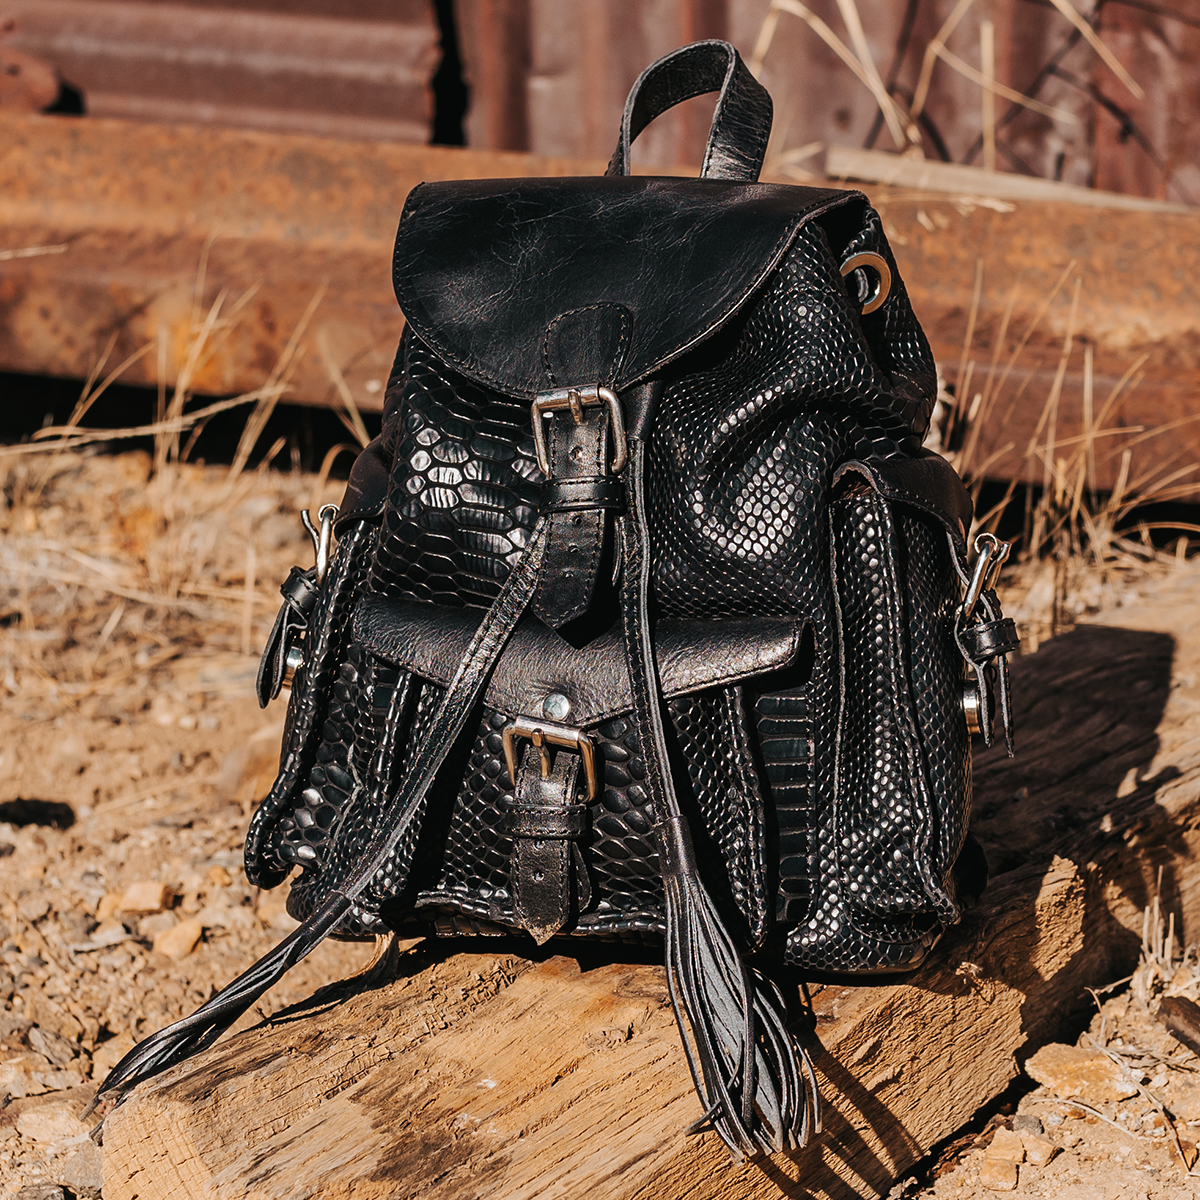 FREEBIRD Brett black snake embossed leather backpack with working exterior pockets and drawstring closure